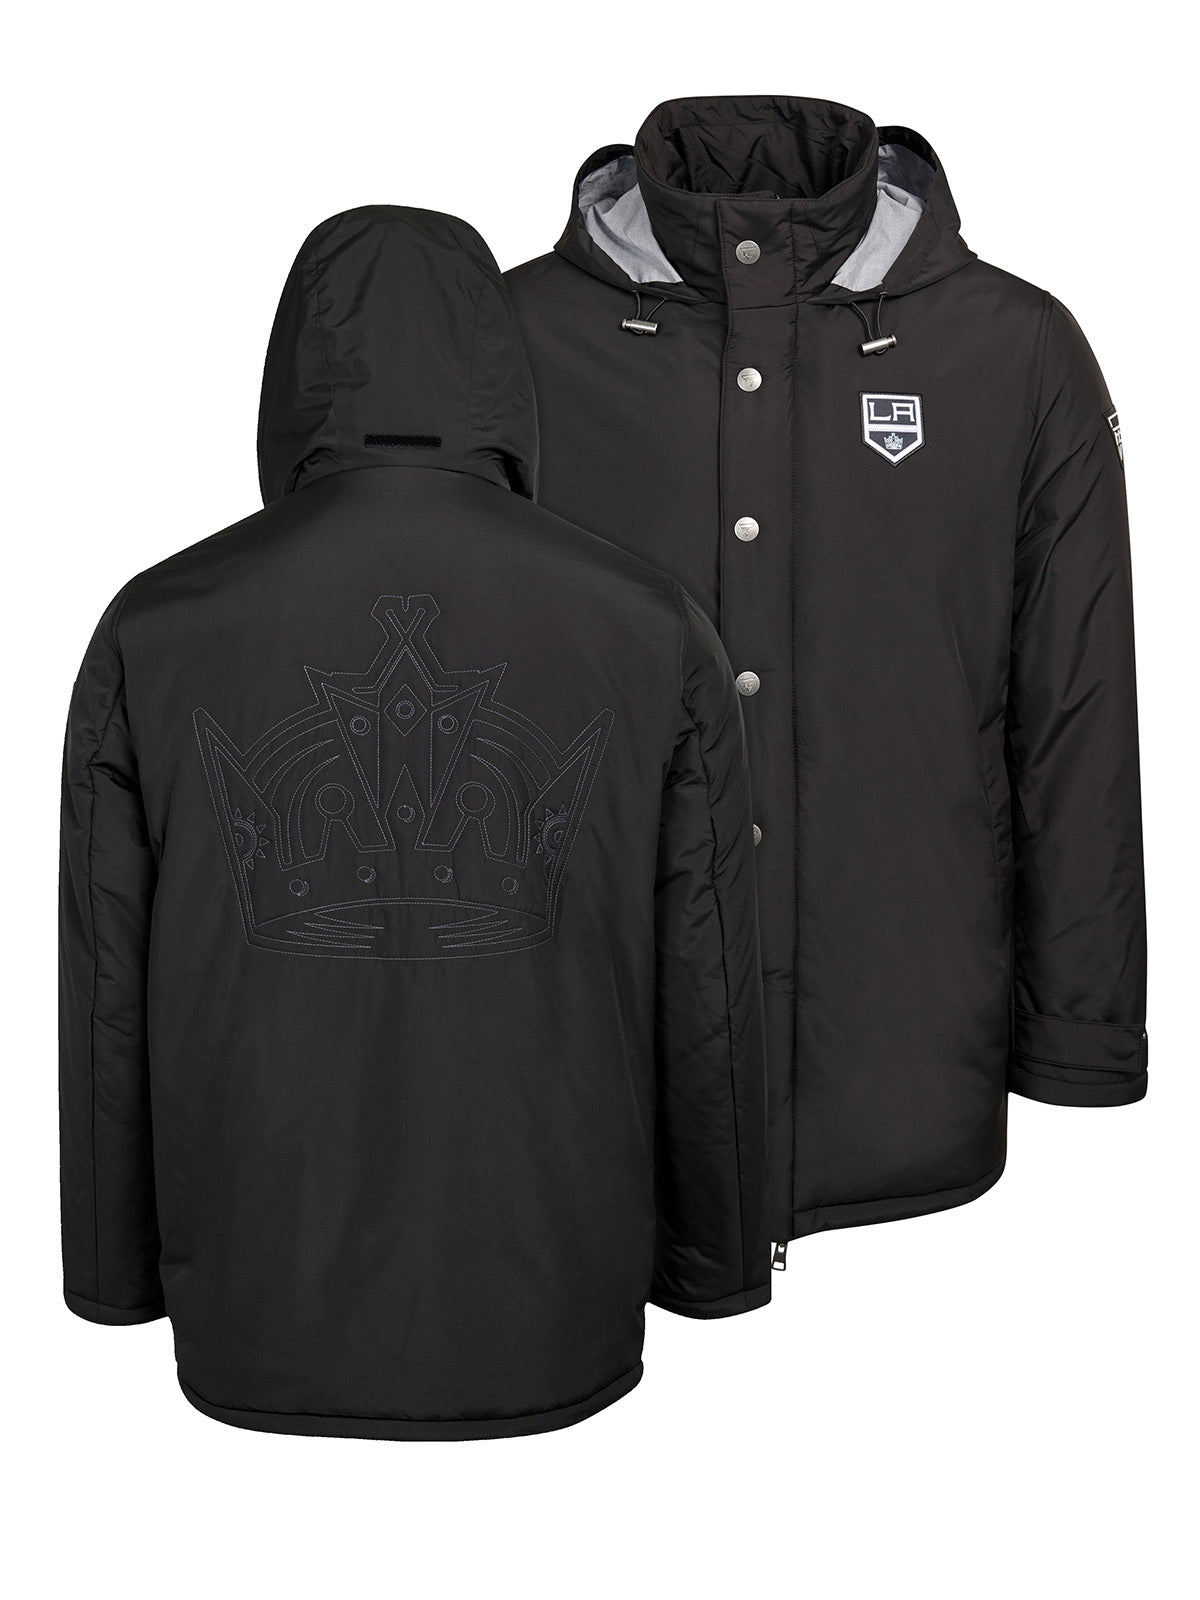 Los Angeles Kings Coach's Jacket - The jacket features a quilted stitch of the Los Angeles Kings logo centered on the back and has a removal hood in the team colors, elevating this NHL hockey clothing collection